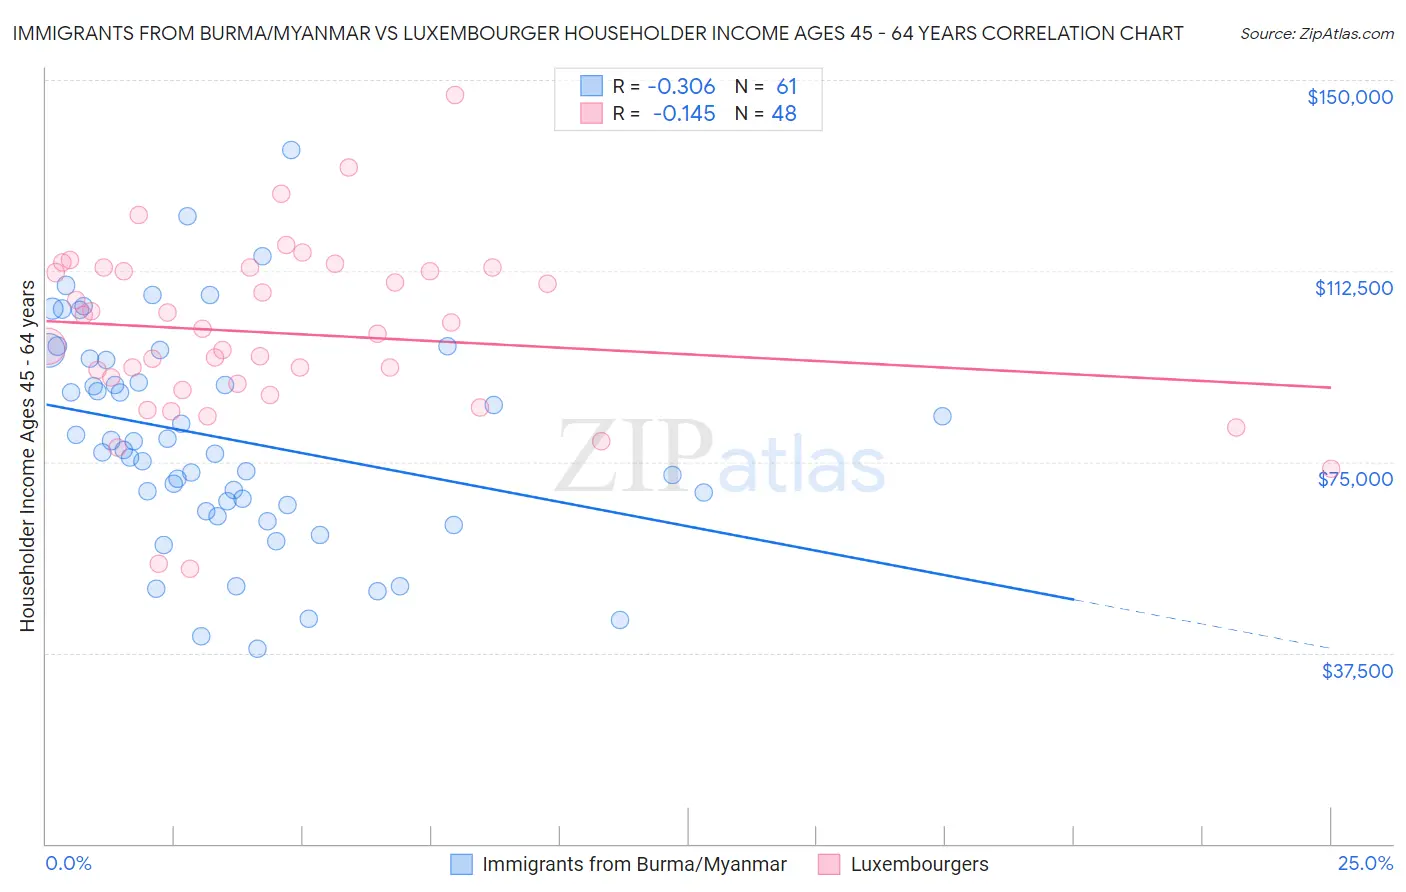 Immigrants from Burma/Myanmar vs Luxembourger Householder Income Ages 45 - 64 years